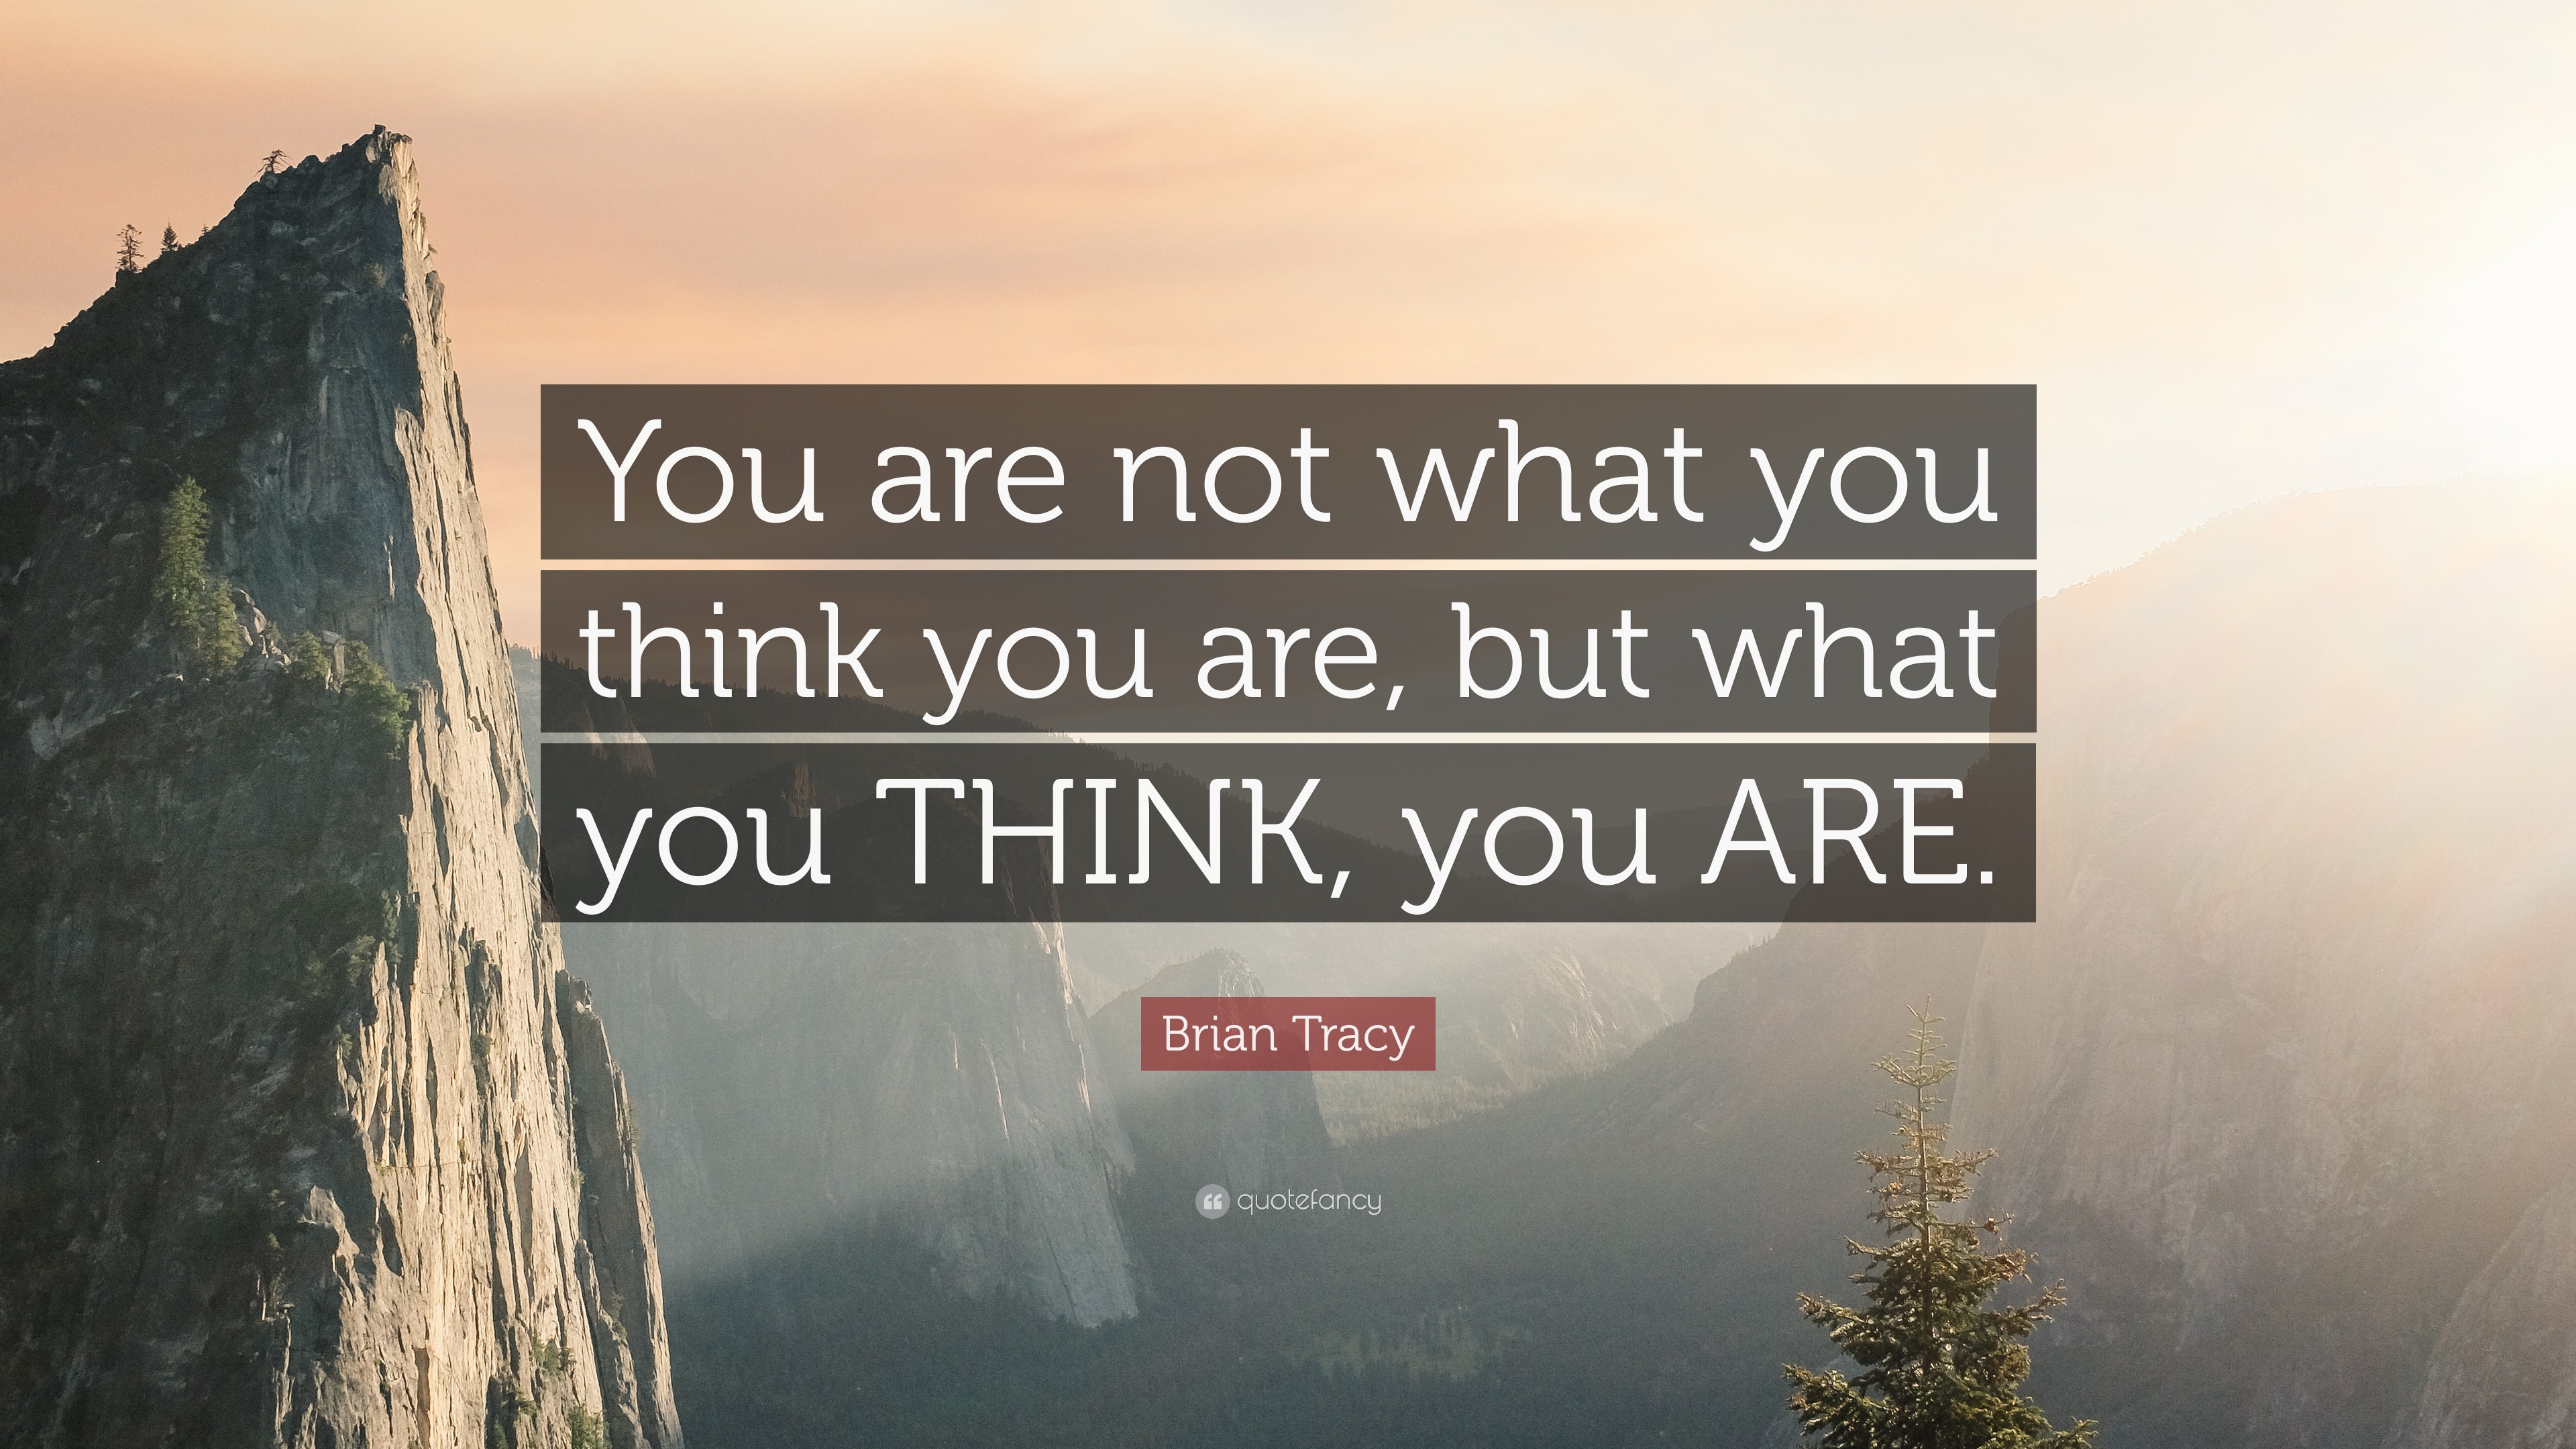 Brian Tracy Quote You Are Not What You Think You Are But What You Think You